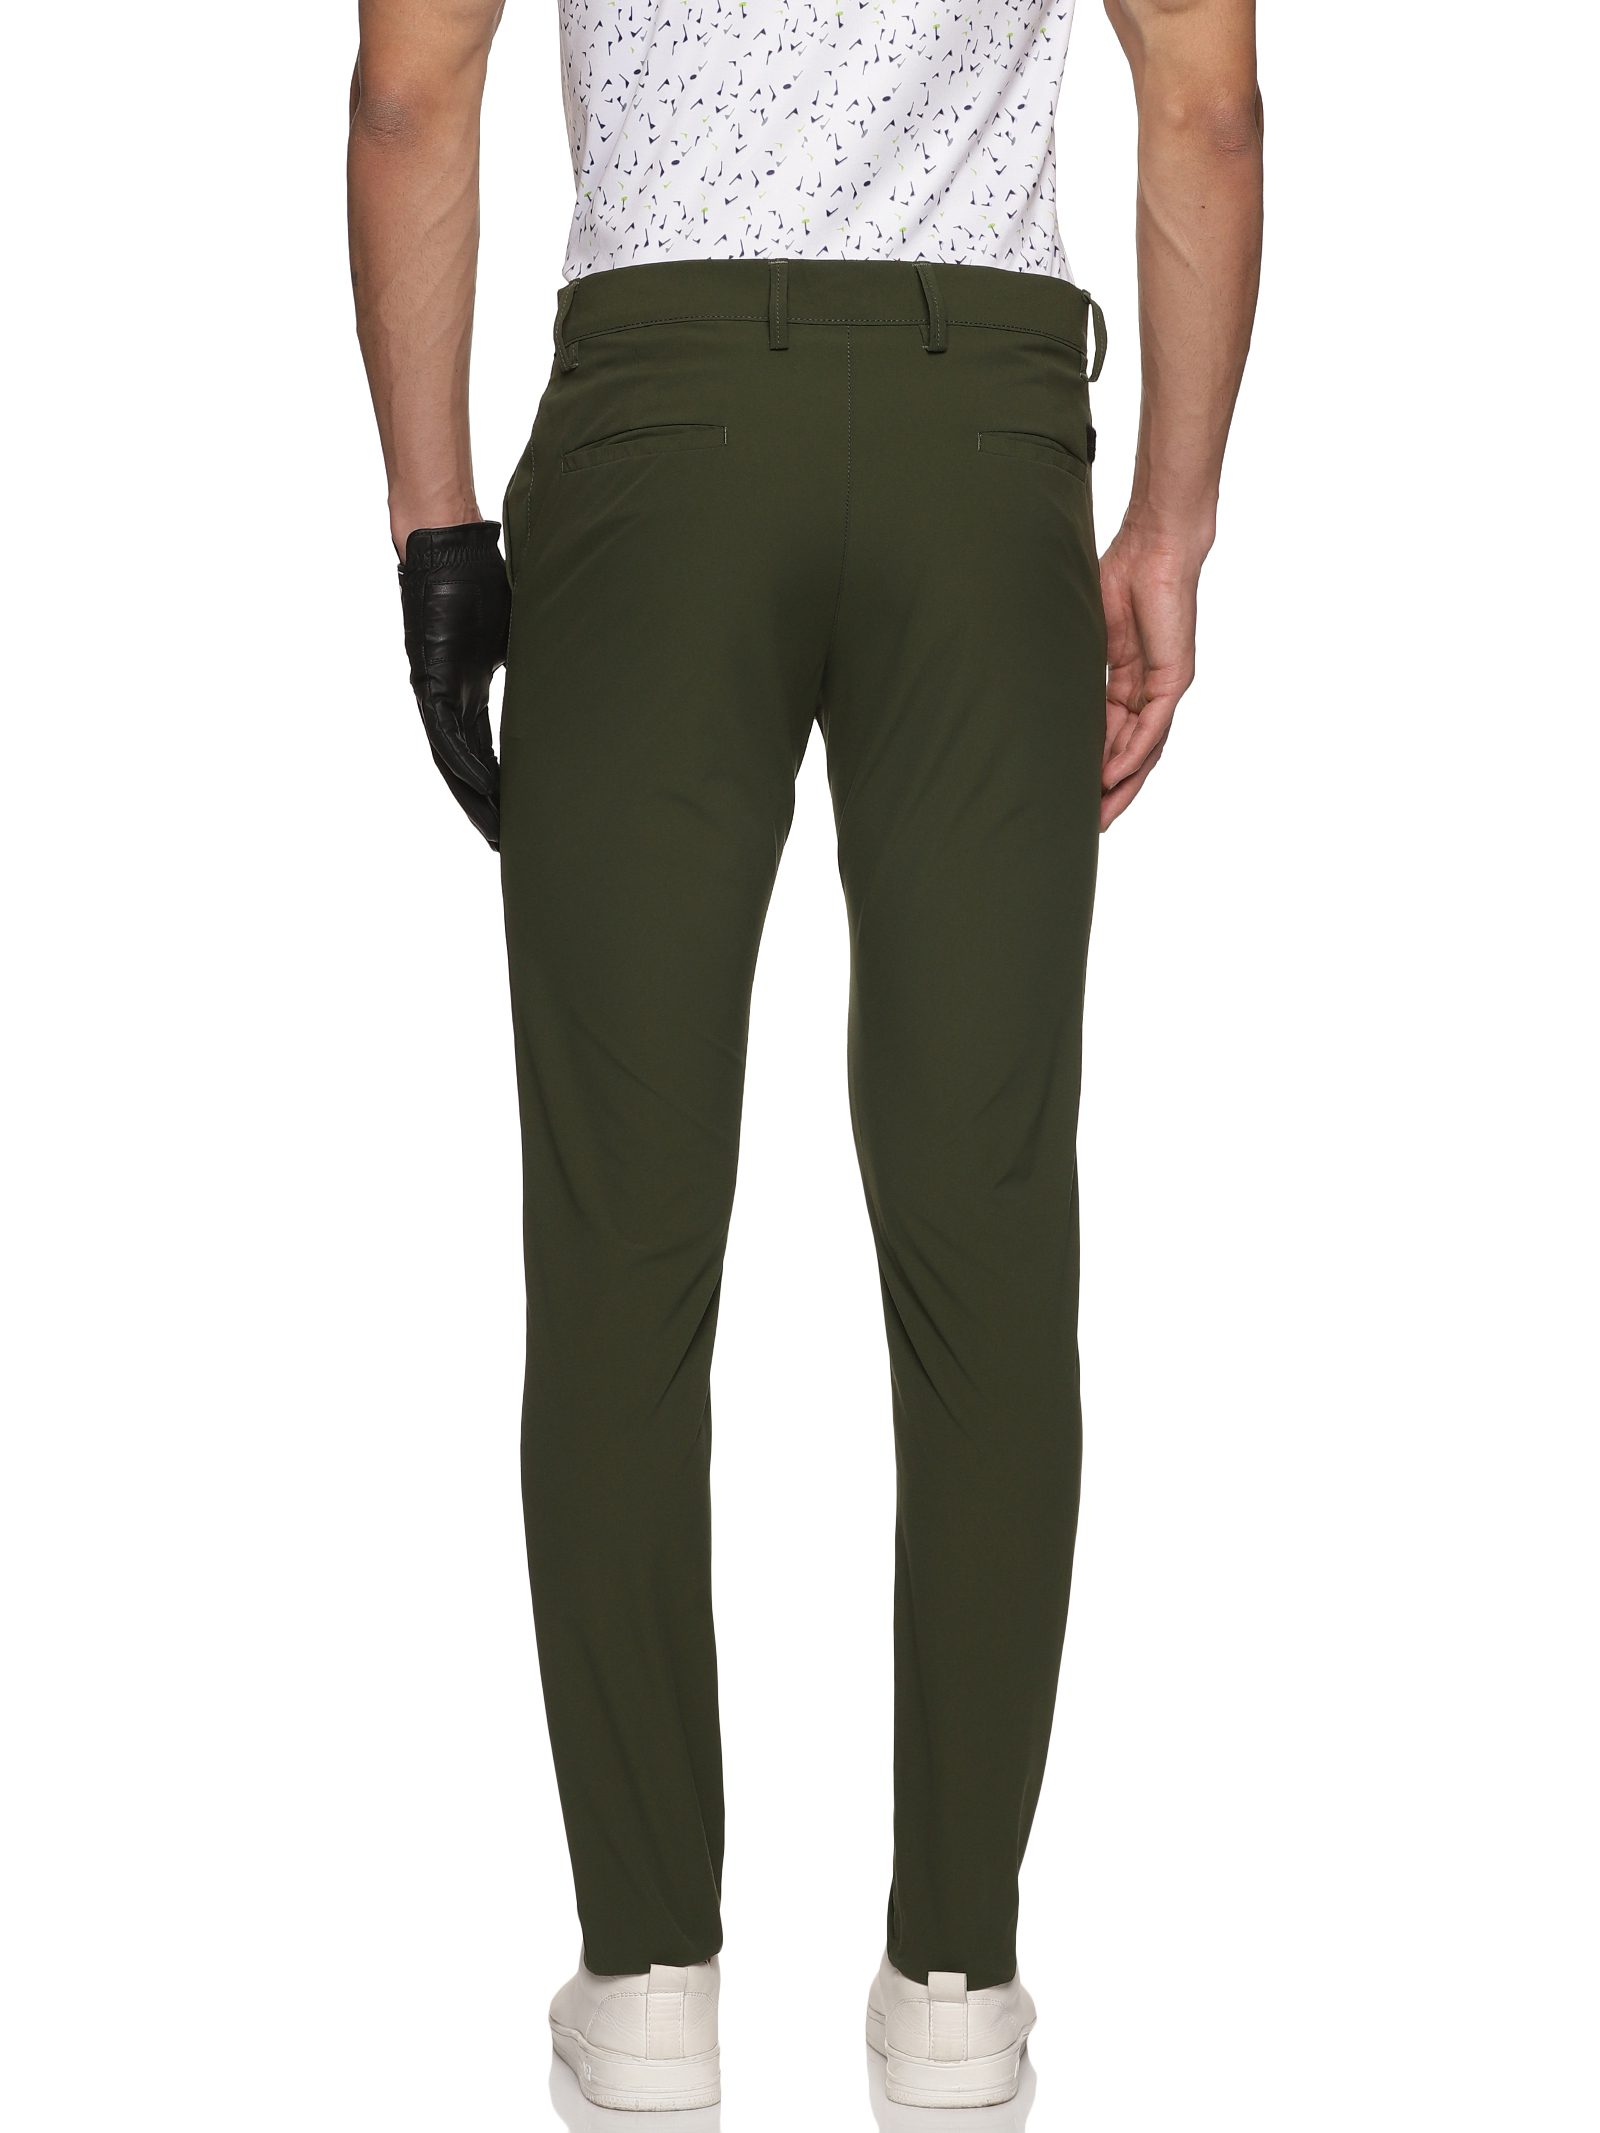 Turms Intelligent Apparel - Anti-Stain & Anti-odour - Sage - Mens Chinos - Olive  Green